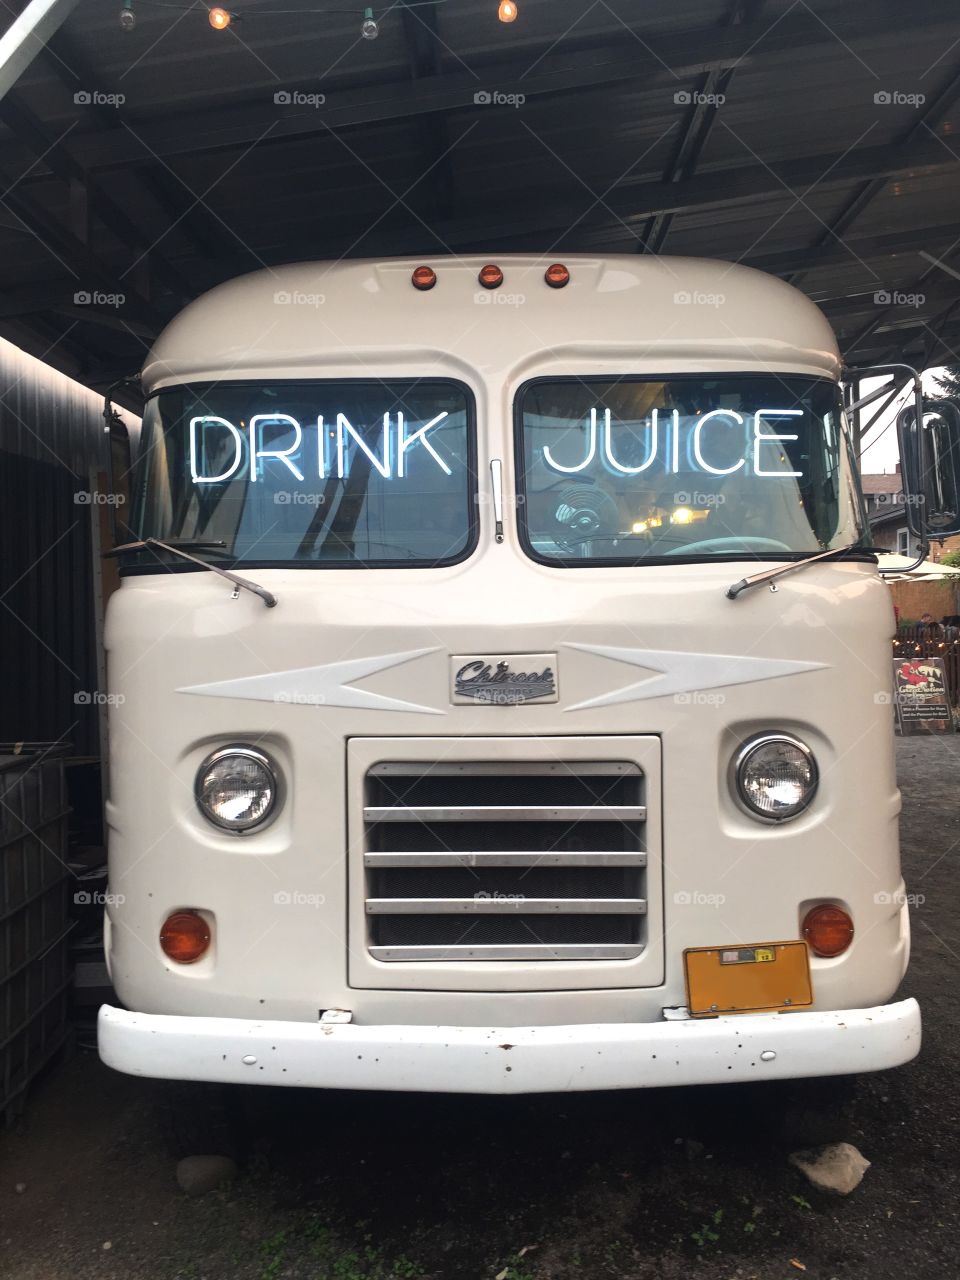 The front of a parked vintage Chinook motor home with ‘Drink Juice’ neon sign in the windshield